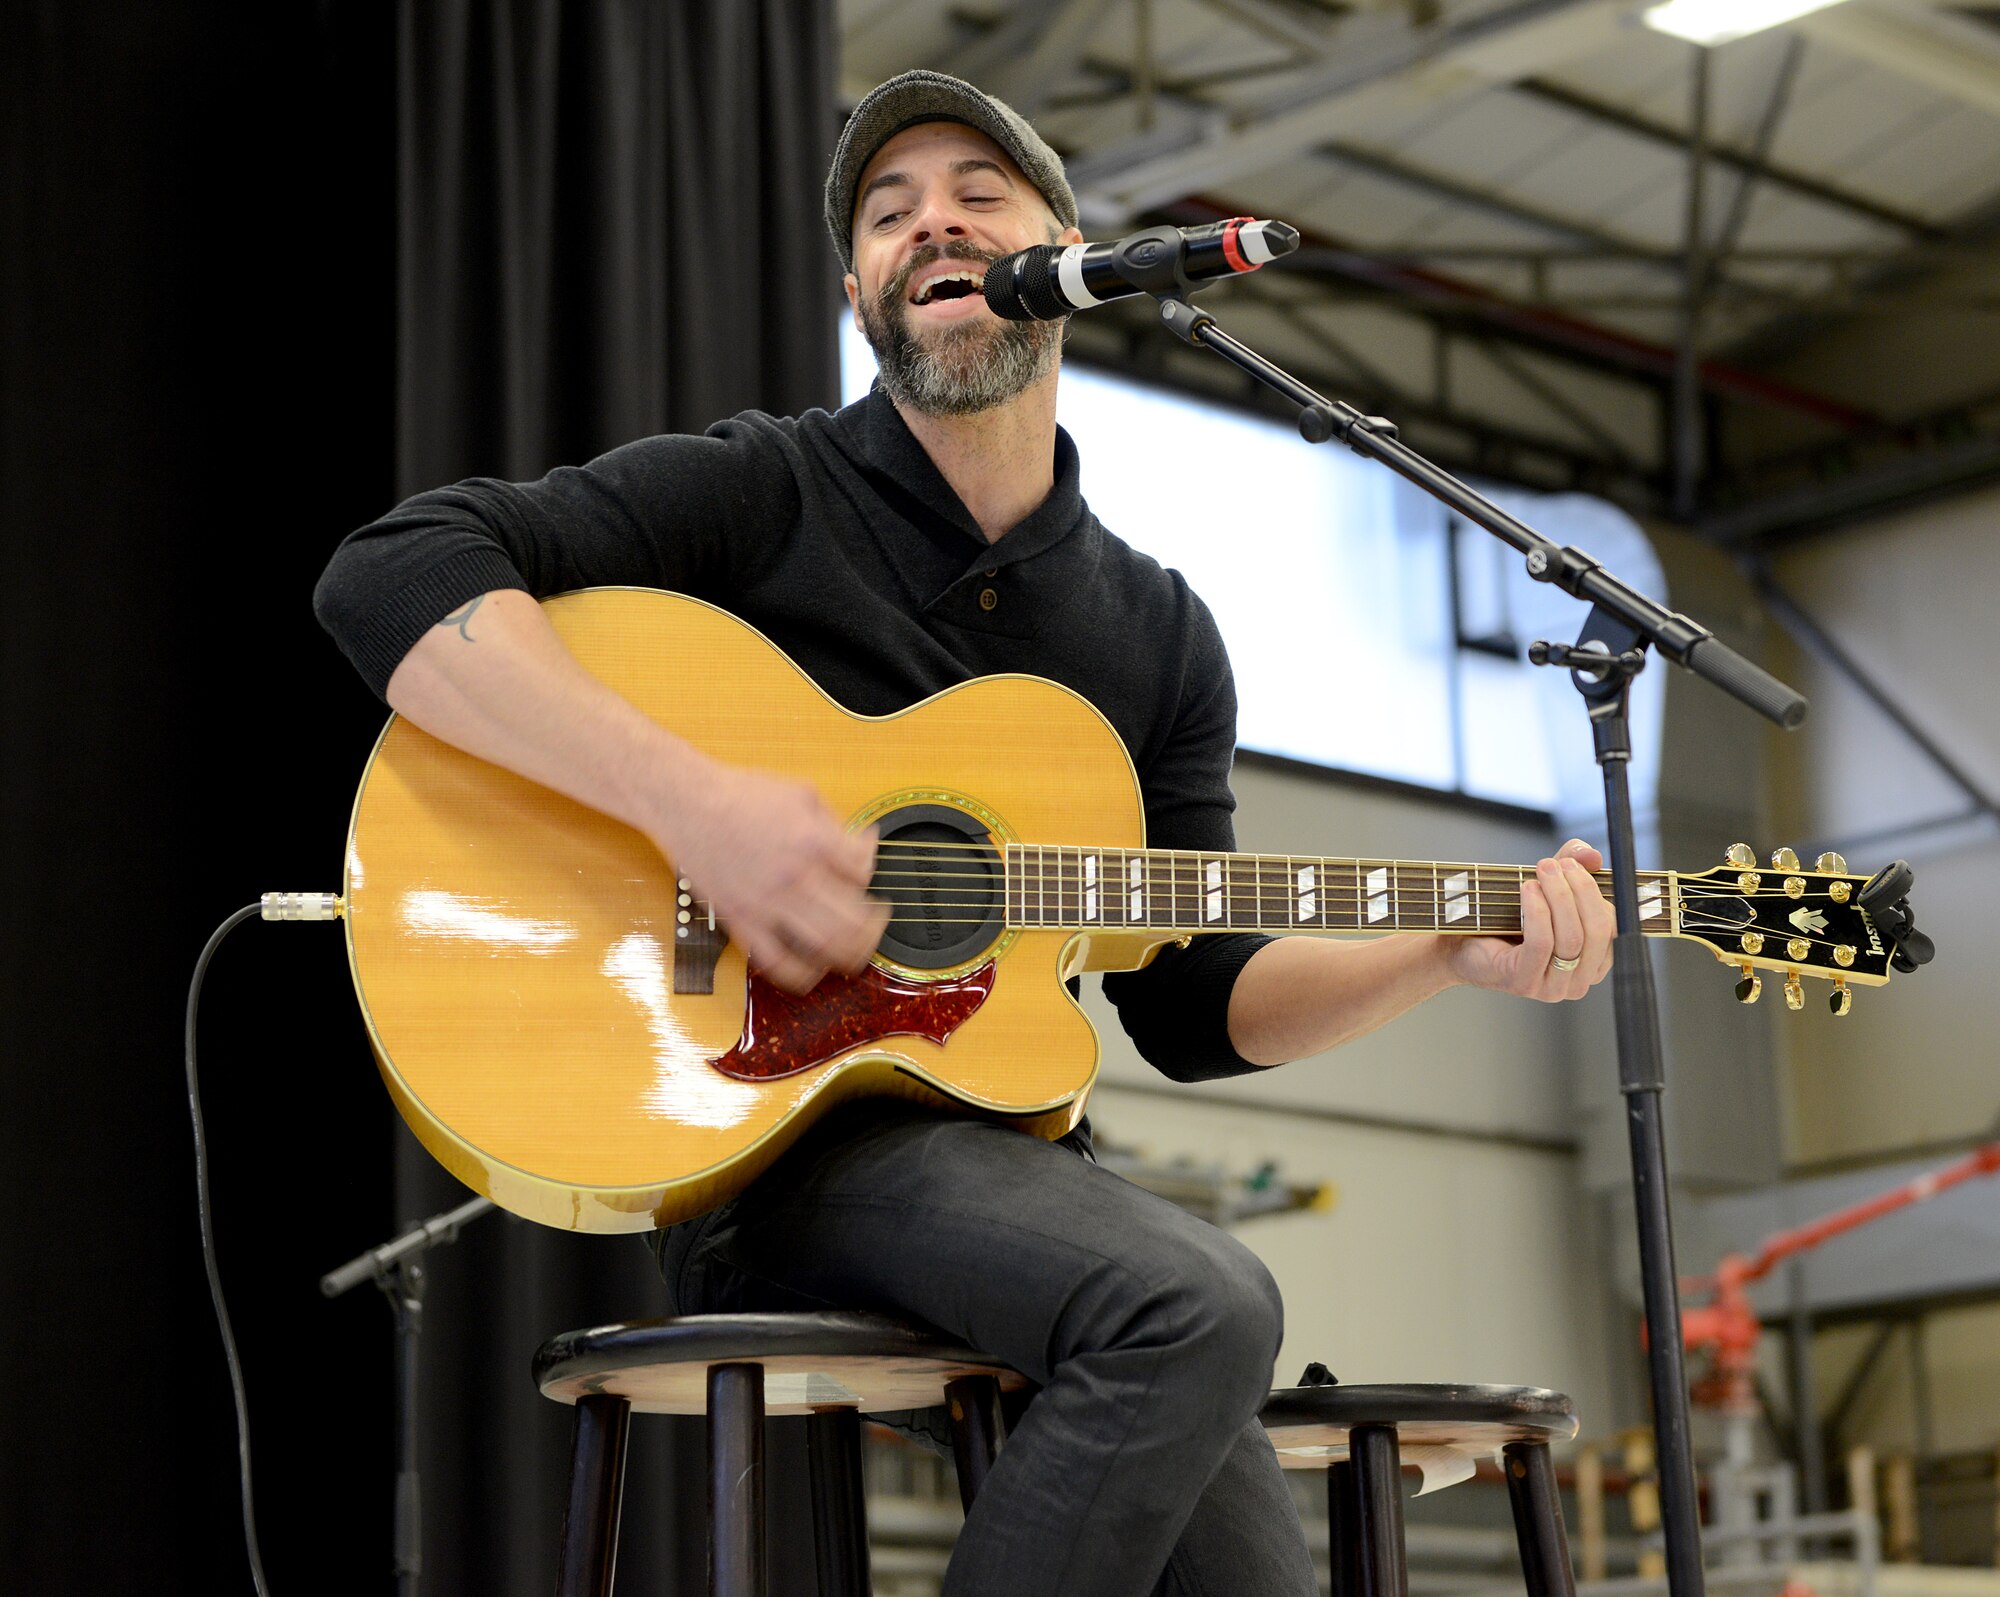 Musician Chris Daughtry sings a pre-show song Dec. 9, 2015, at Ramstein Air Base, Germany. Daughtry and other celebrities joined U.S. Marine Corps Gen. Joseph F. Dunford, chairman of the Joint Chiefs of Staff, for the 2015 USO Holiday Troop Tour to thank service members and their families for their service and sacrifices. (U.S. Air Force photo/Staff Sgt. Timothy Moore)